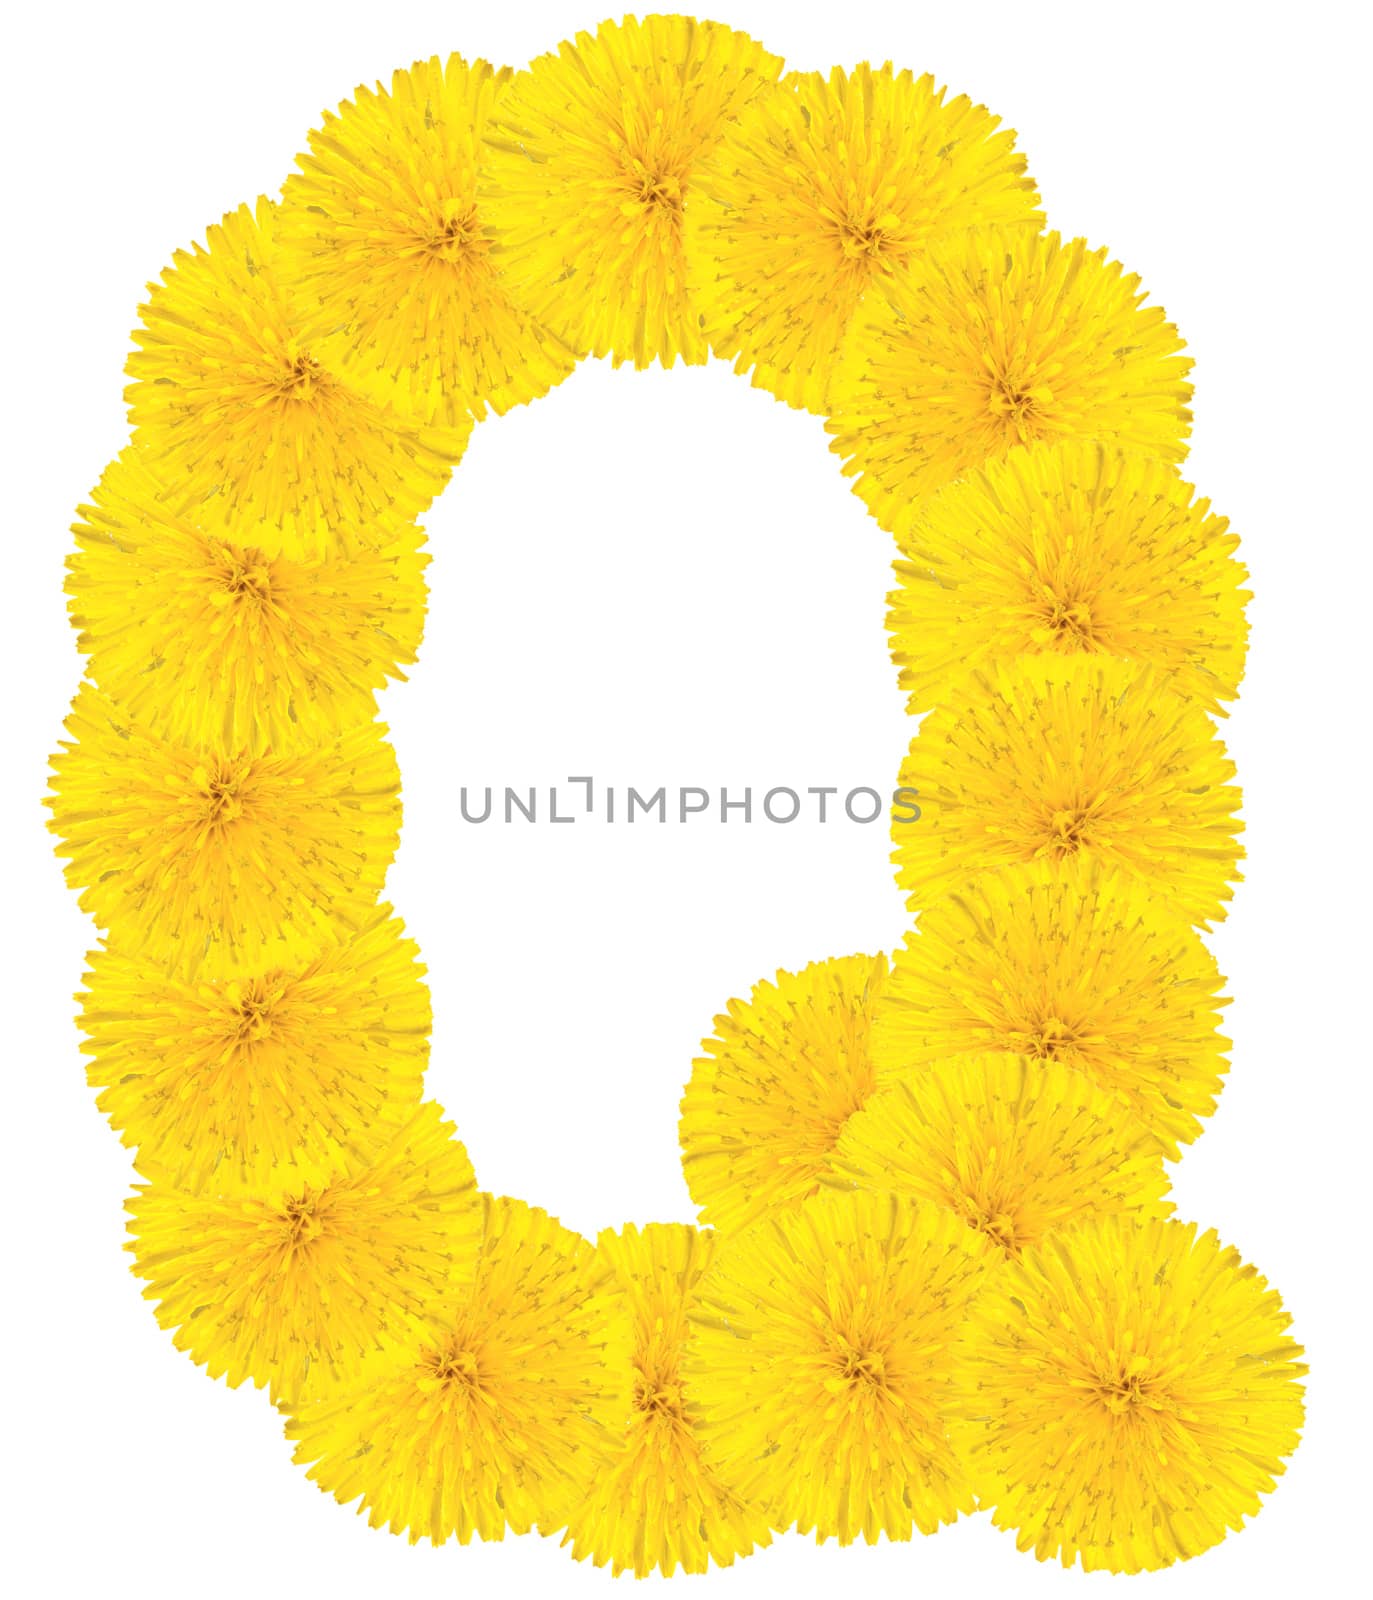 Letter Q made from dandelion flowers isolated on white background